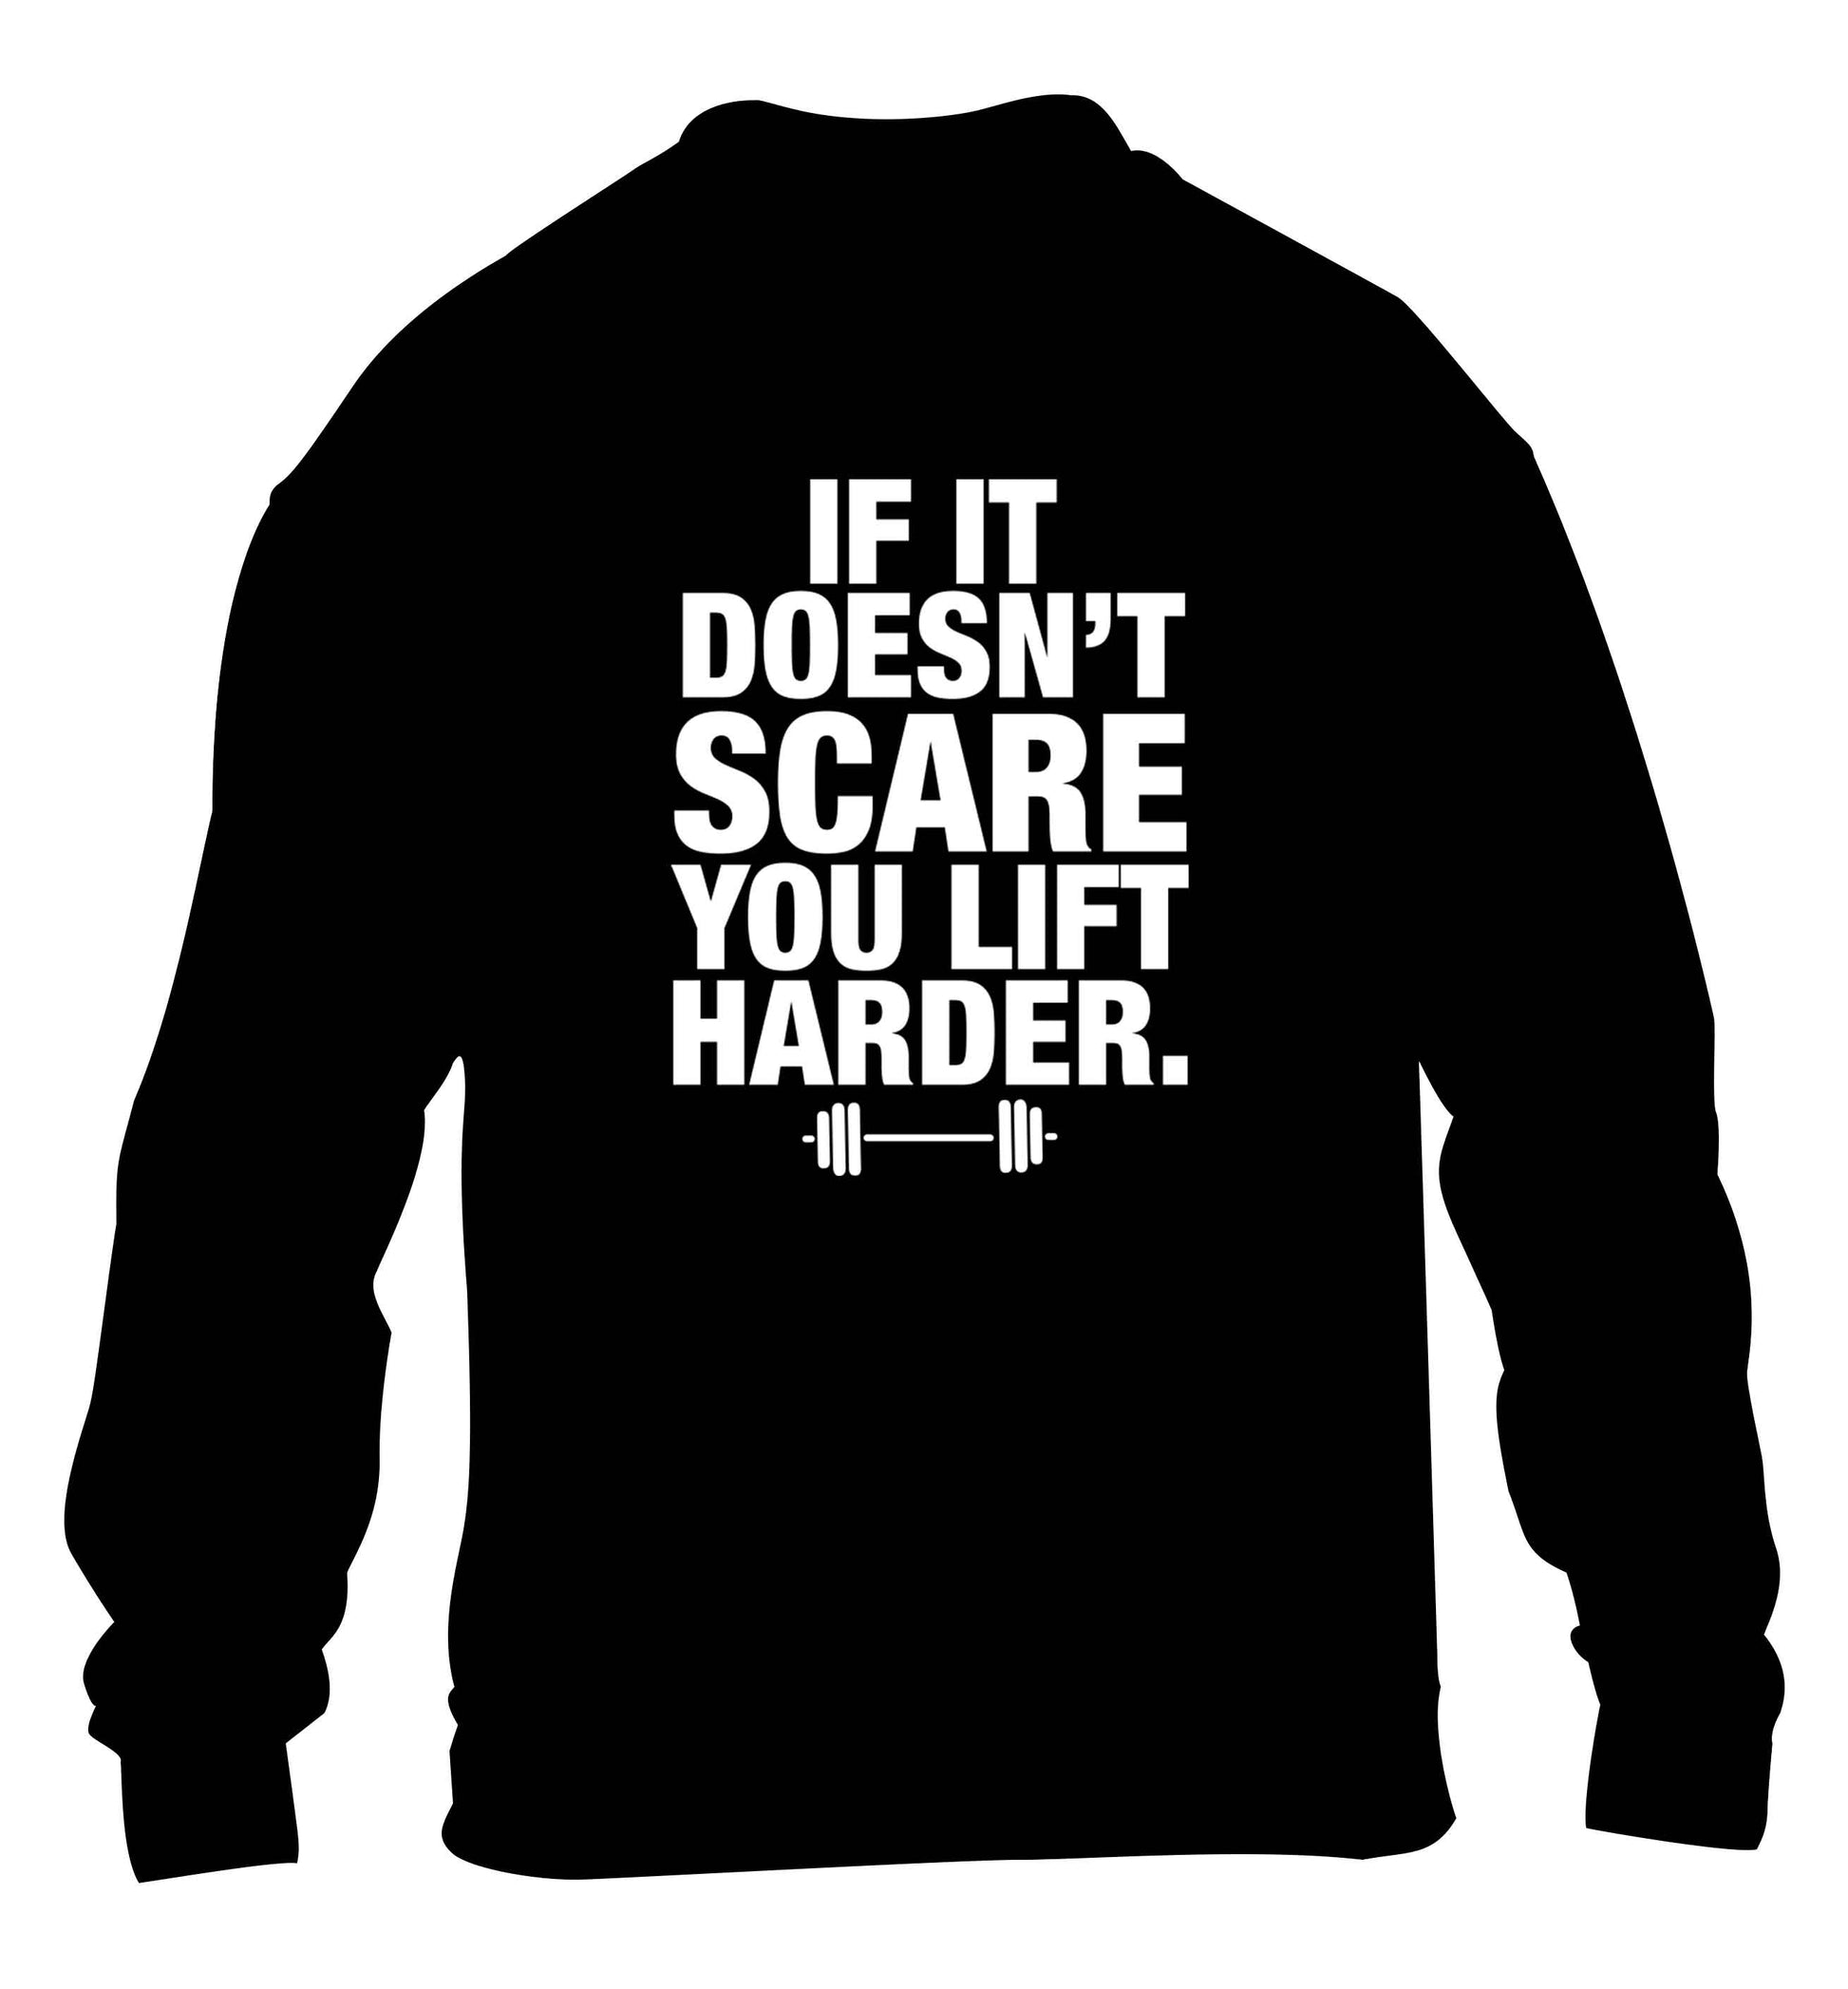 If it doesnt' scare you lift harder children's black sweater 12-13 Years